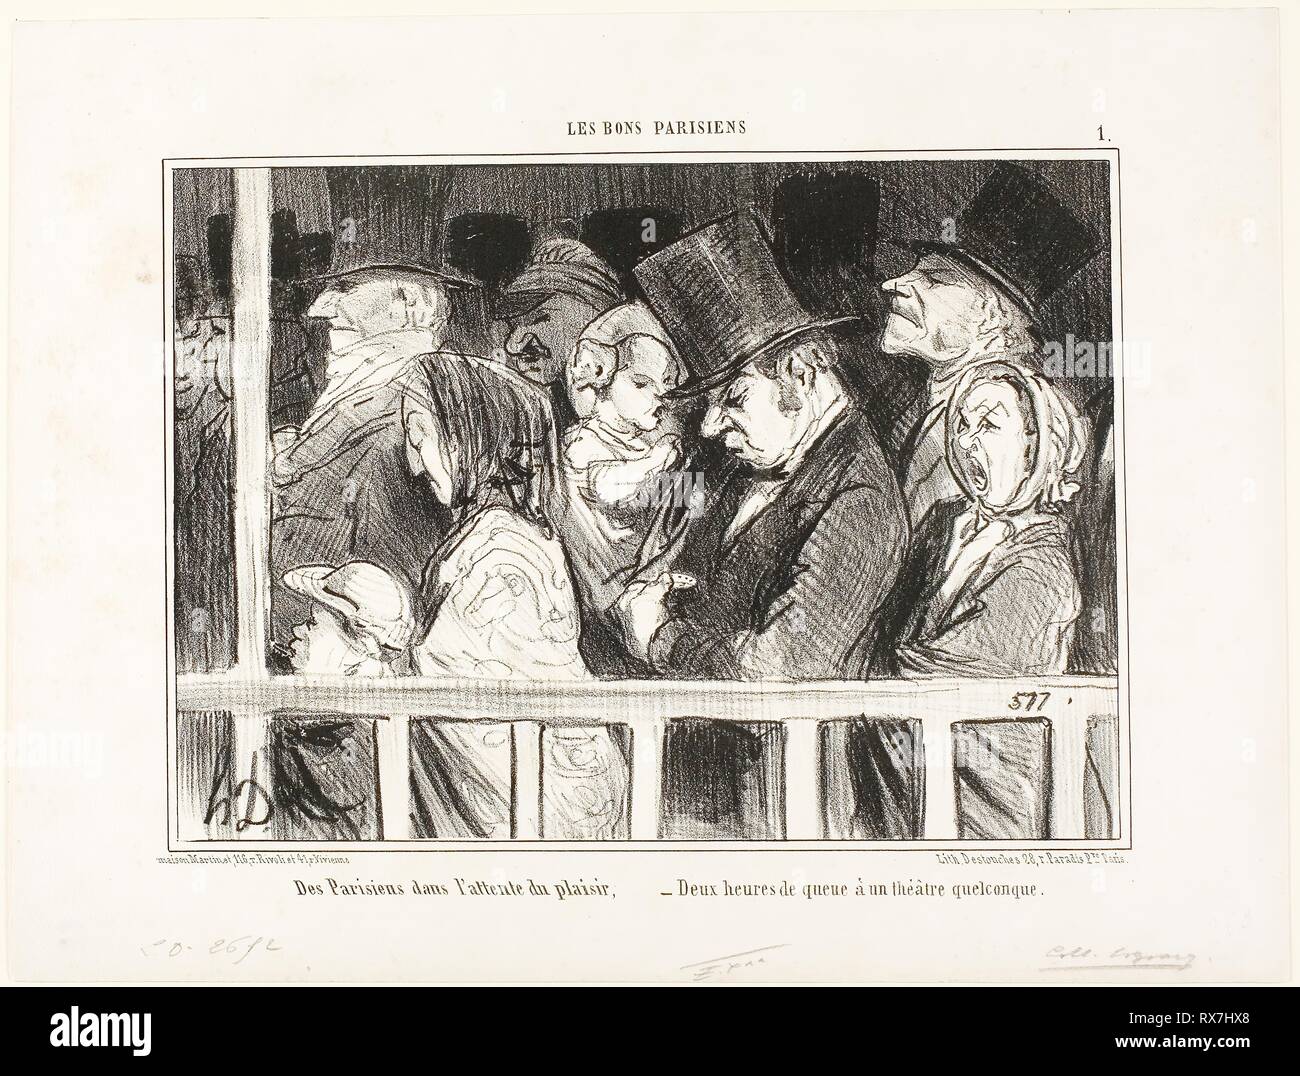 Parisians looking forward to some fun. Queuing up for two hours in front of any theater in town, plate 1 from Les Bons Parisiens. Honoré Victorin Daumier; French, 1808-1879. Date: 1855. Dimensions: 180 × 255 mm (image); 257 × 343 mm (sheet). Lithograph in black on white wove paper. Origin: France. Museum: The Chicago Art Institute. Author: Honoré-Victorin Daumier. Stock Photo